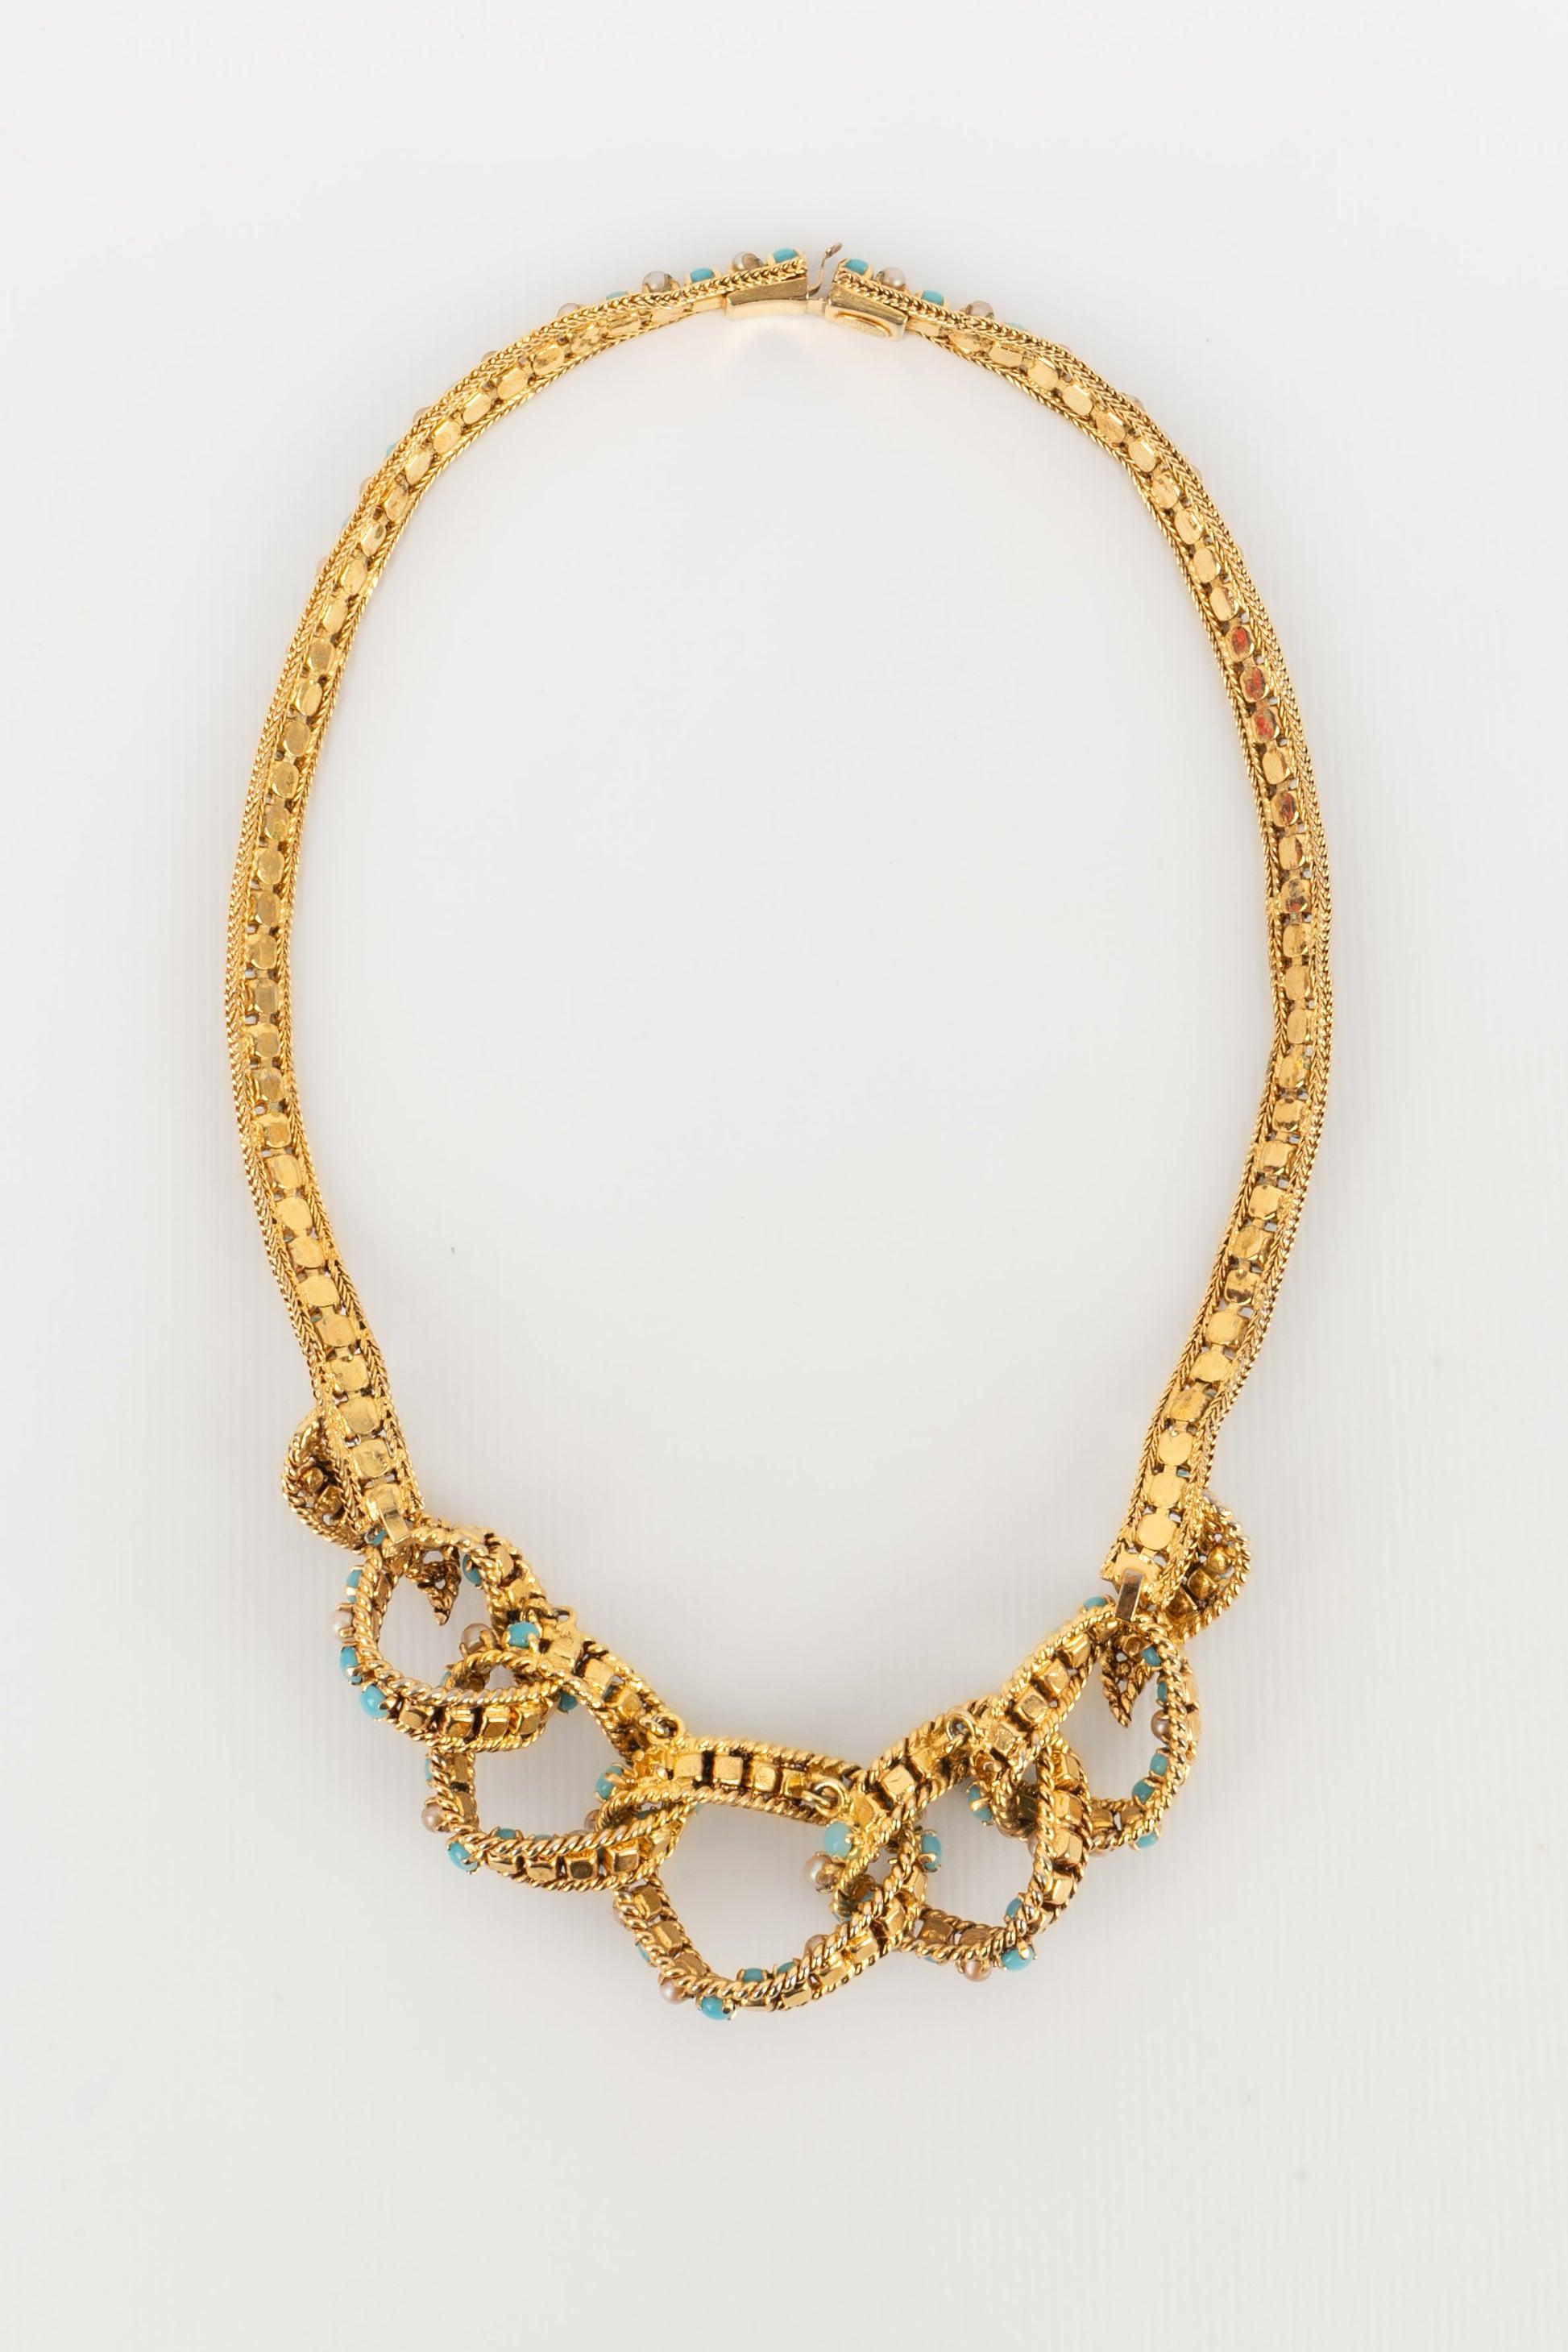 Dior - Golden metal necklace ornamented with costume pearly cabochons and blue glass paste. 1965 Collection.

Additional information:
Condition: Good condition
Dimensions: Length: 40 cm
Period: 20th Century

Seller Reference: BC209